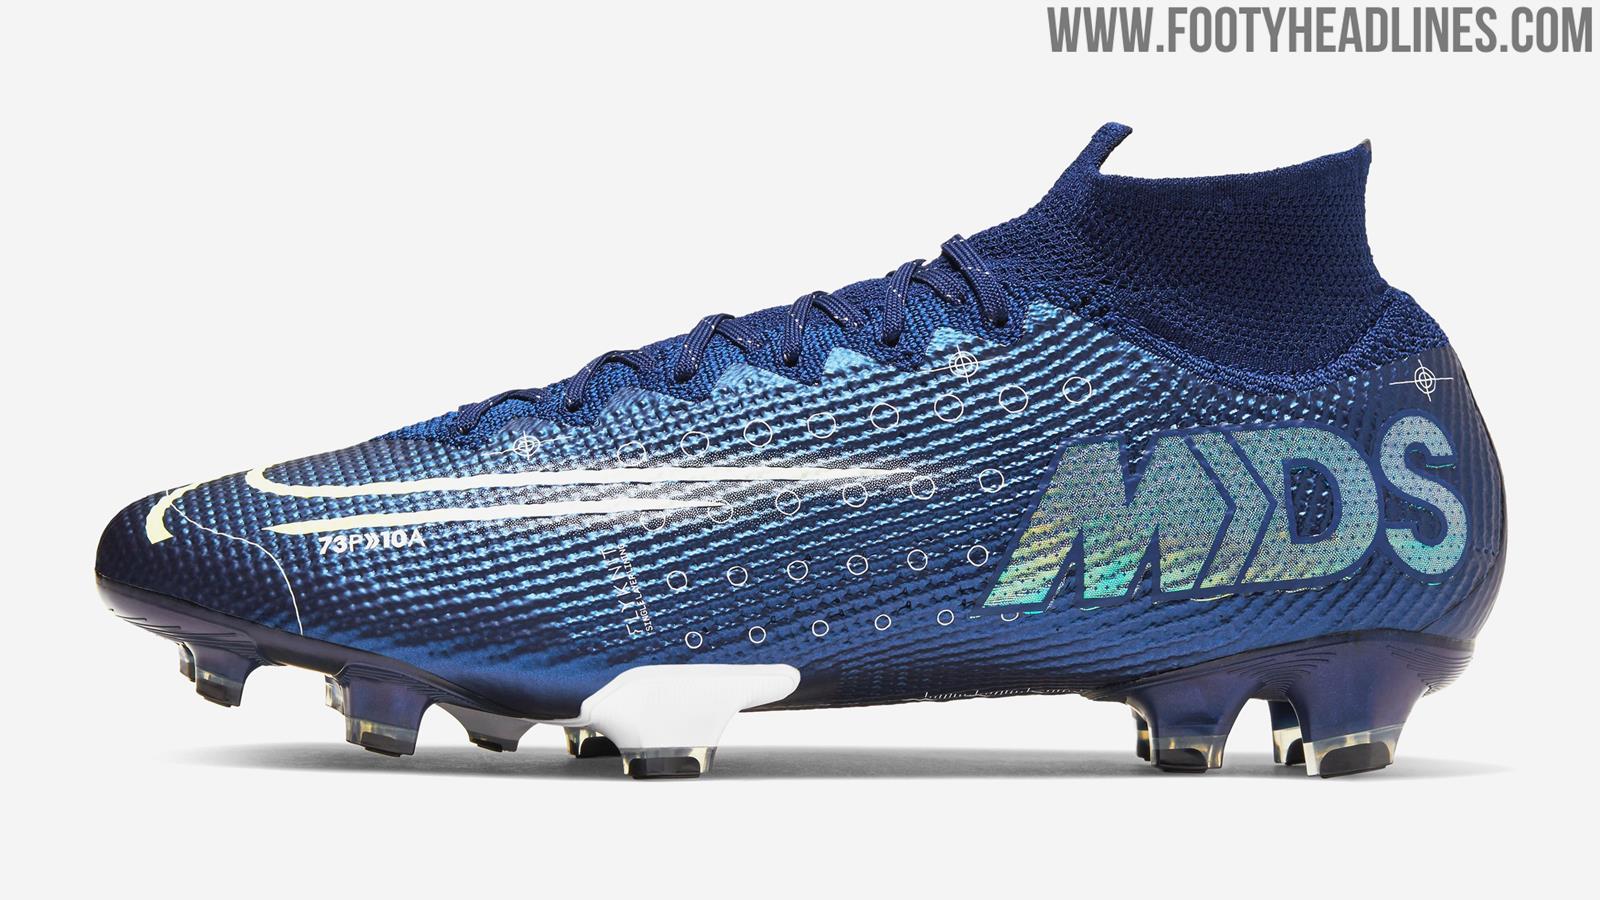 Conciliator Reporter Plumber Nike Mercurial 'Dream Speed' 2019-20 Boots Released - CR7 & Mbappe  Signature Boots - Footy Headlines